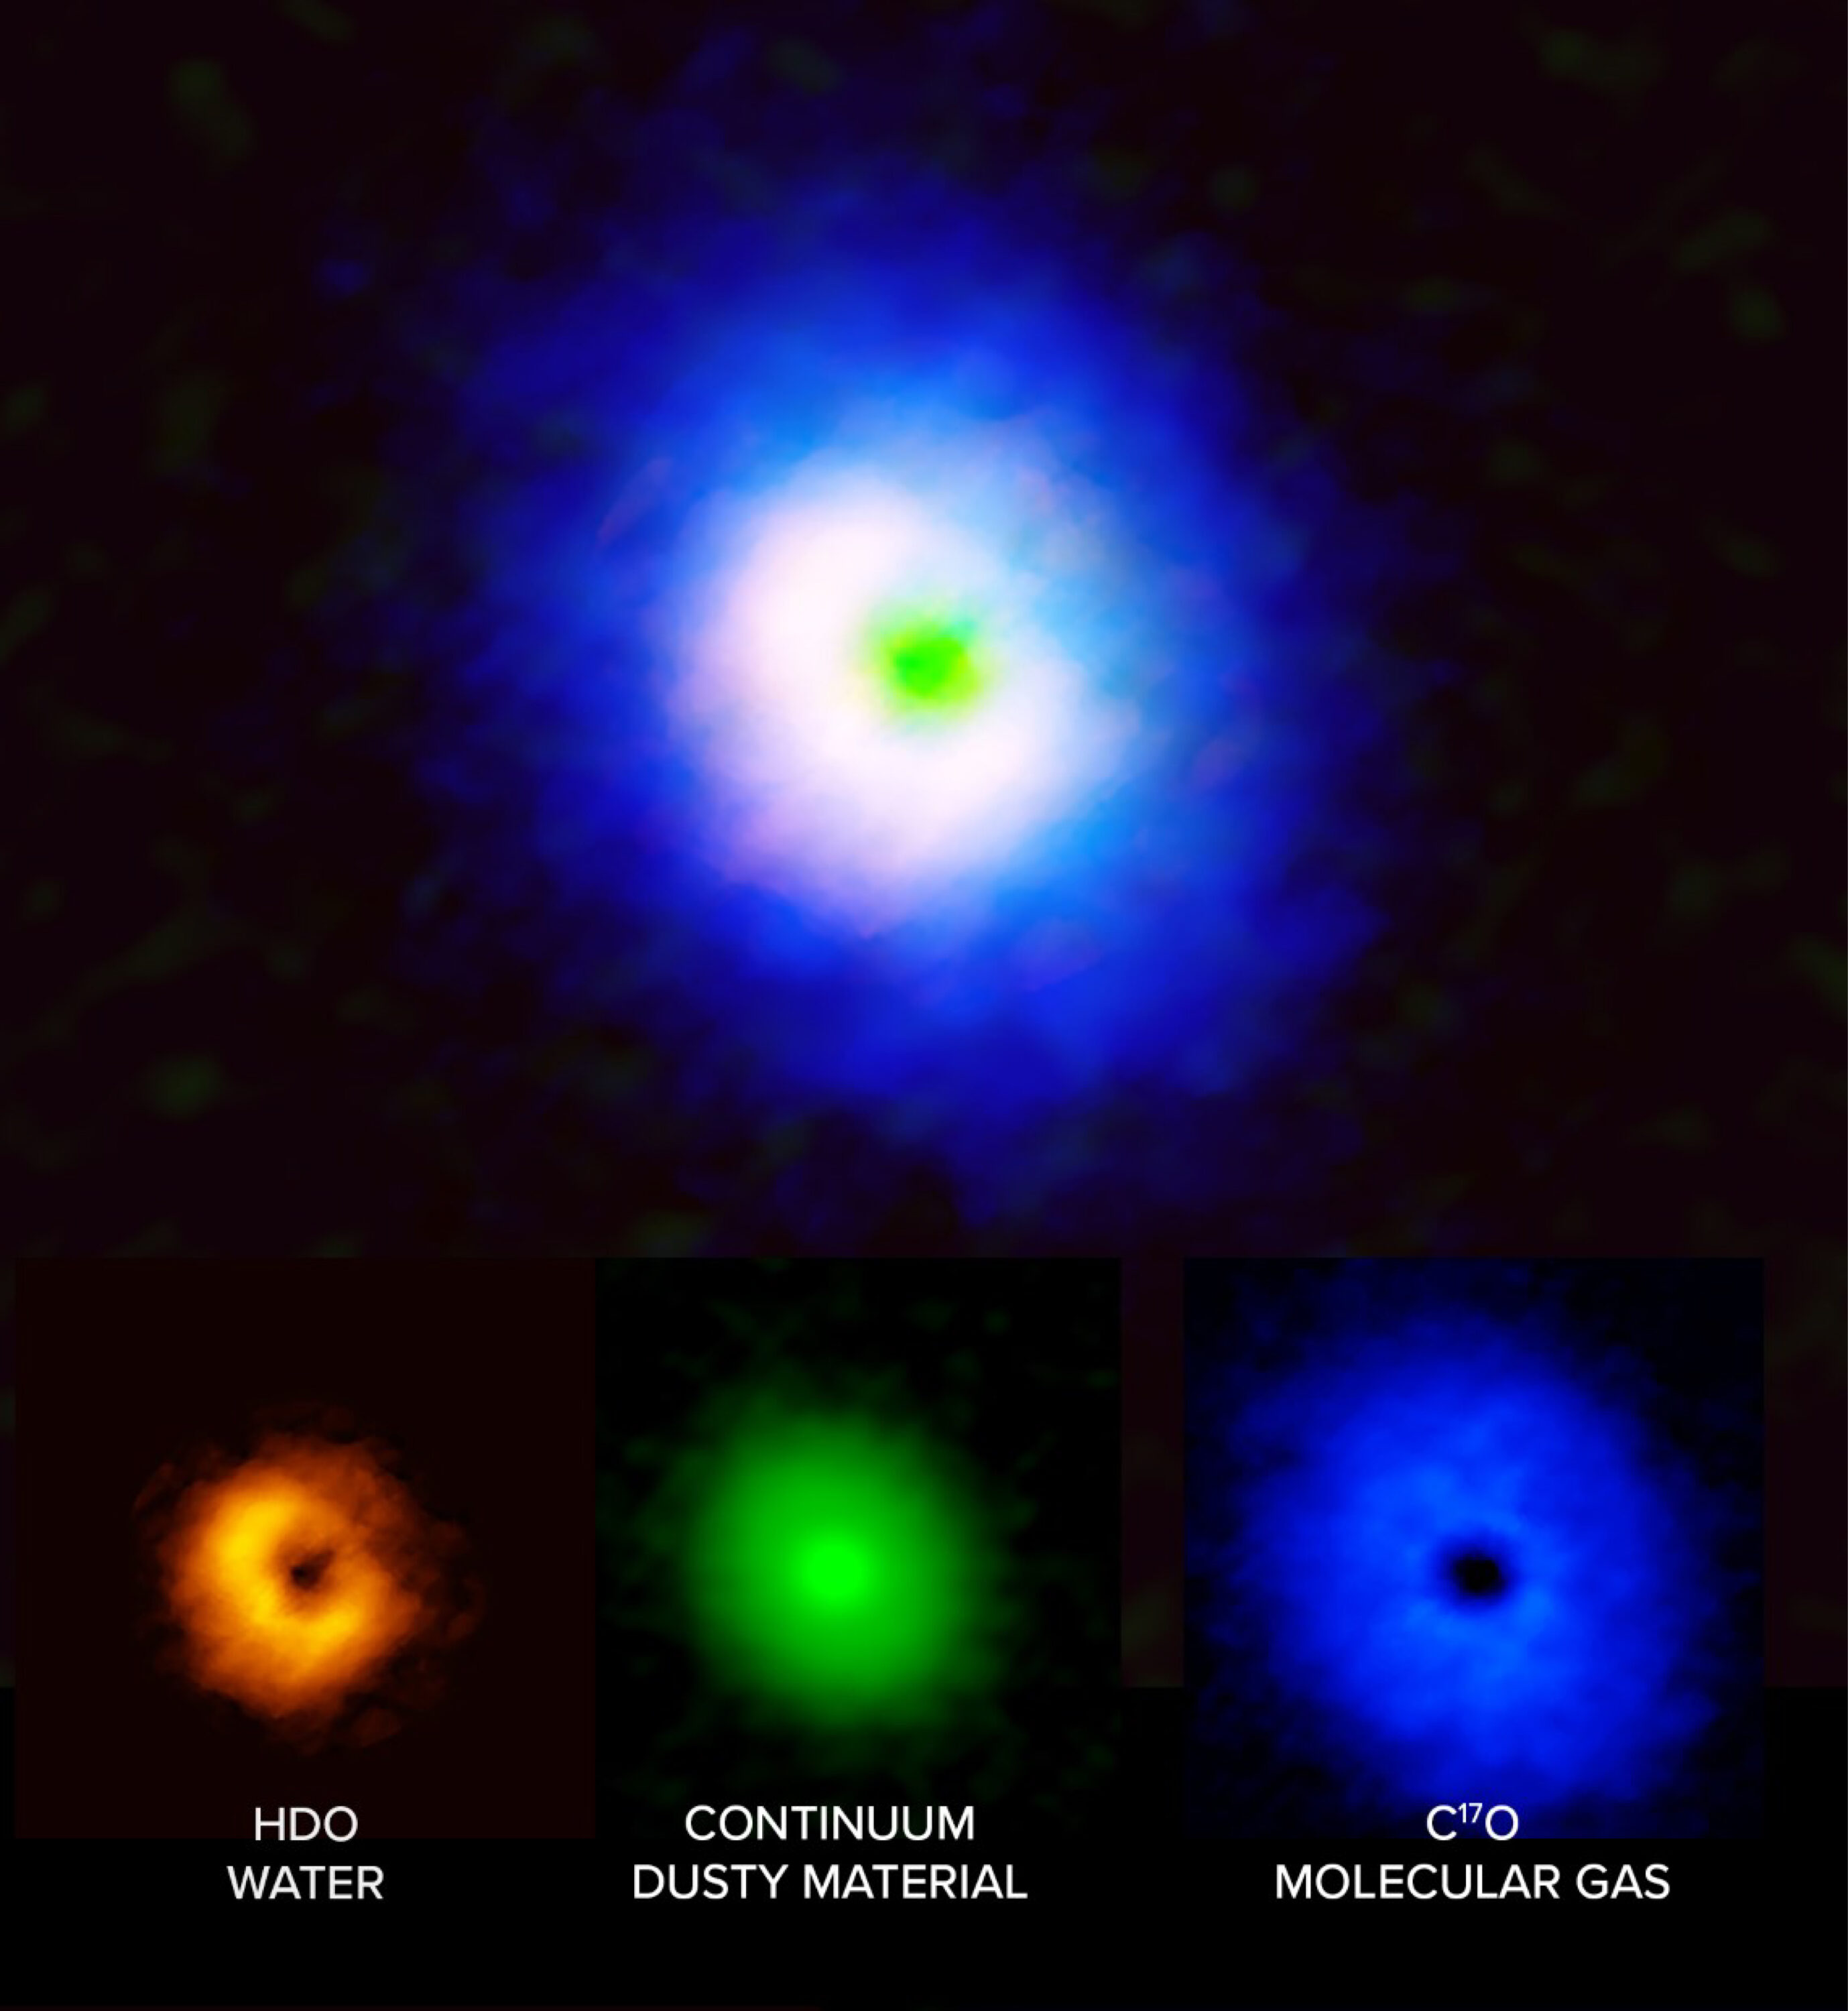 While searching for the origins of water in our Solar System, scientists homed in on V883 Orionis, a unique protostar located 1,305 light-years away from Earth. Unlike with other protostars, the circumstellar disk surrounding V883 Ori is just hot enough that the water in it has transformed from ice into gas, making it possible for scientists to study its compositions using radio telescopes like those at the Atacama Large Millimeter/submillimeter Array (ALMA). Radio observations of the protostar, revealed molecular gas (blue), water (orange), and a dust continuum (green) which suggests that the water on this protostar is extremely similar to the water on objects in our own Solar System, and may have similar origins. Credit: ALMA (ESO/NAOJ/NRAO), J. Tobin, B. Saxton (NRAO/AUI/NSF)